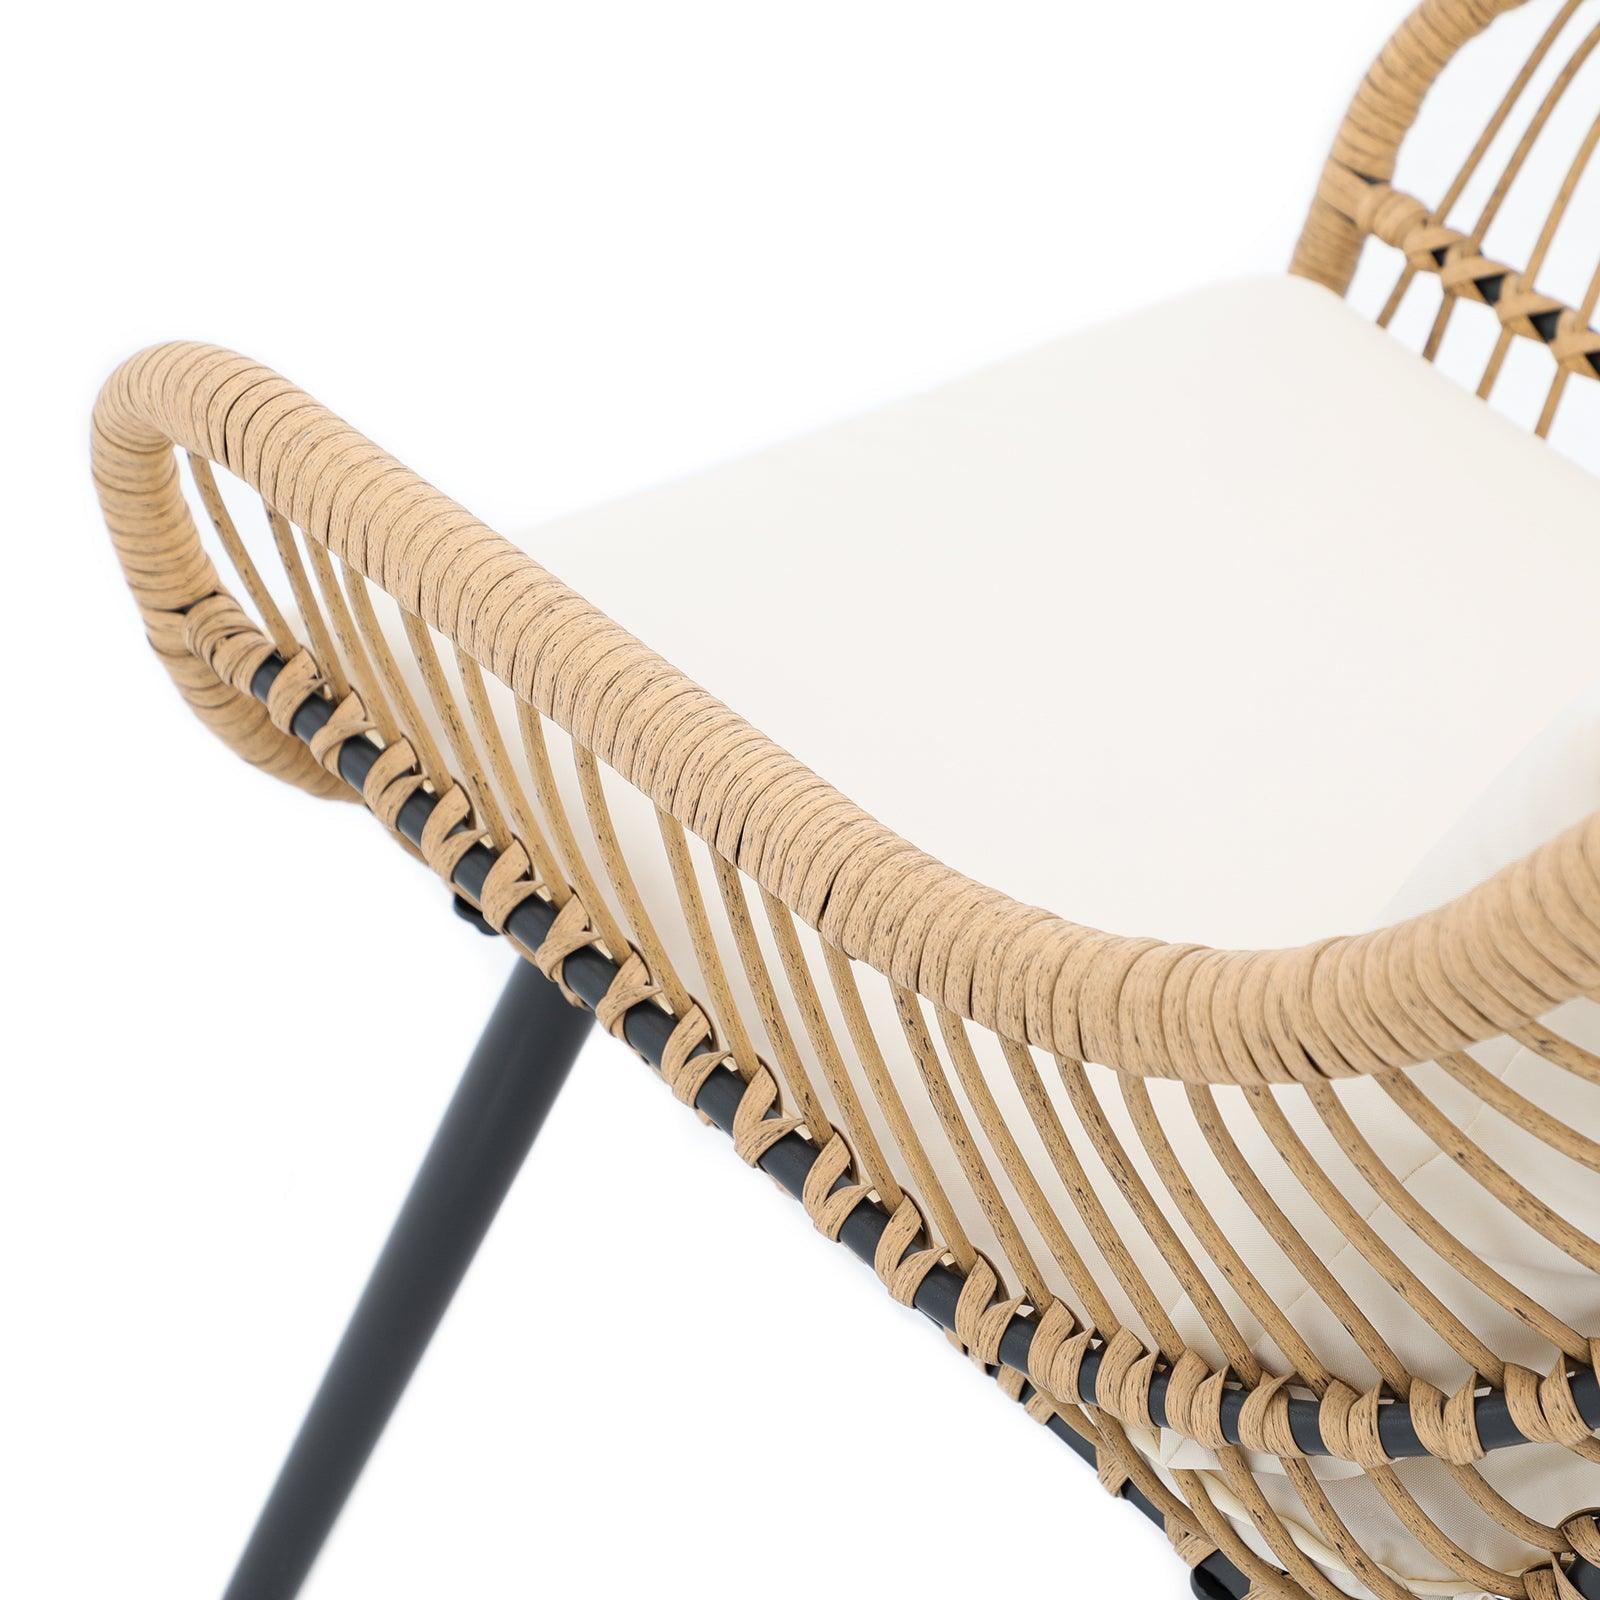 Oia Natural Wicker Chair, Boho Style Wicker, White Cushion, Hand-woven Wicker Detailed Information-Jardina Furniture - 1#Color_White